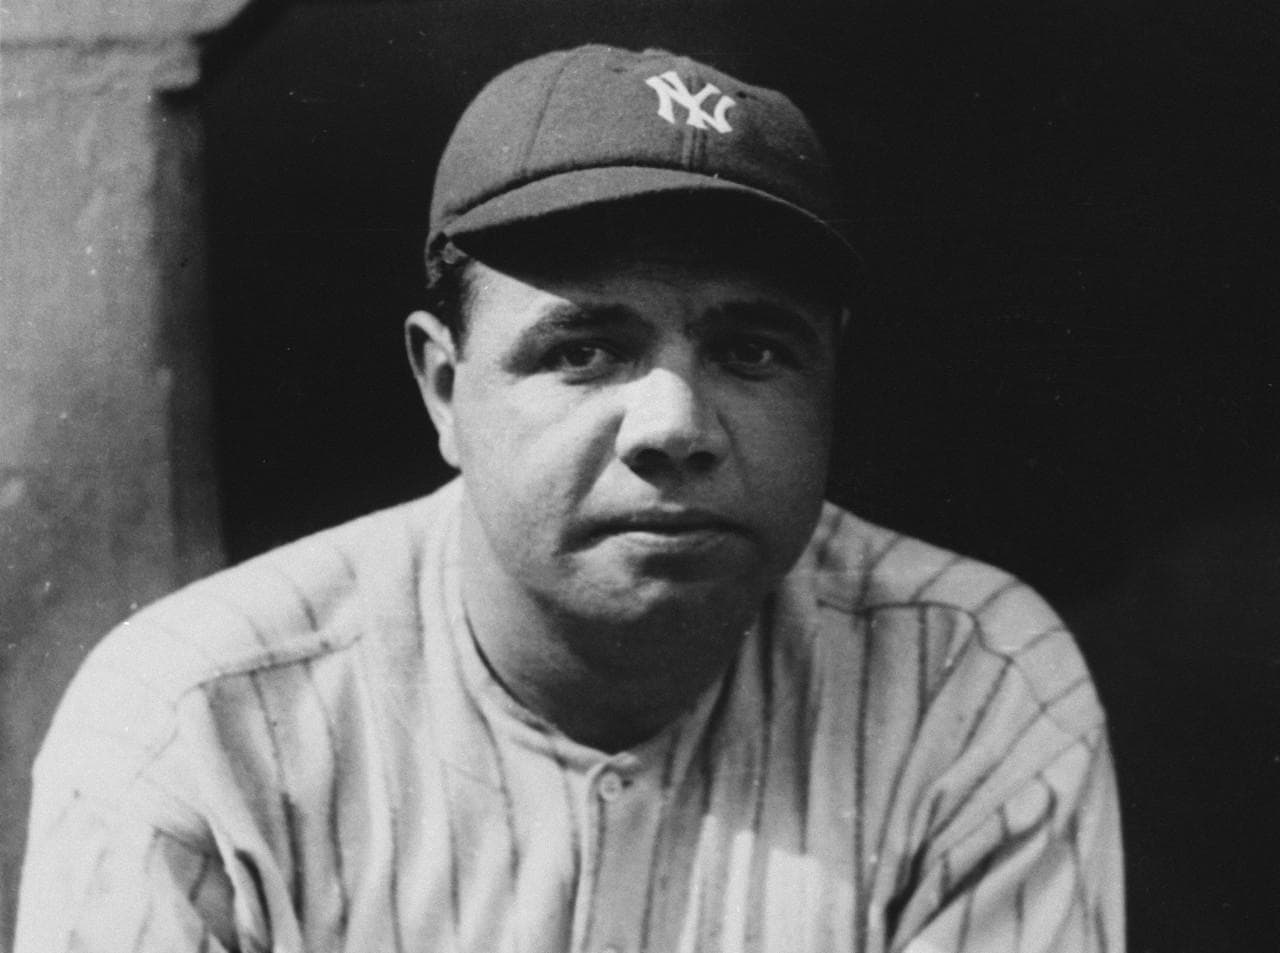 Babe Ruth was one of the greatest power hitters in baseball history. (AP Photo)